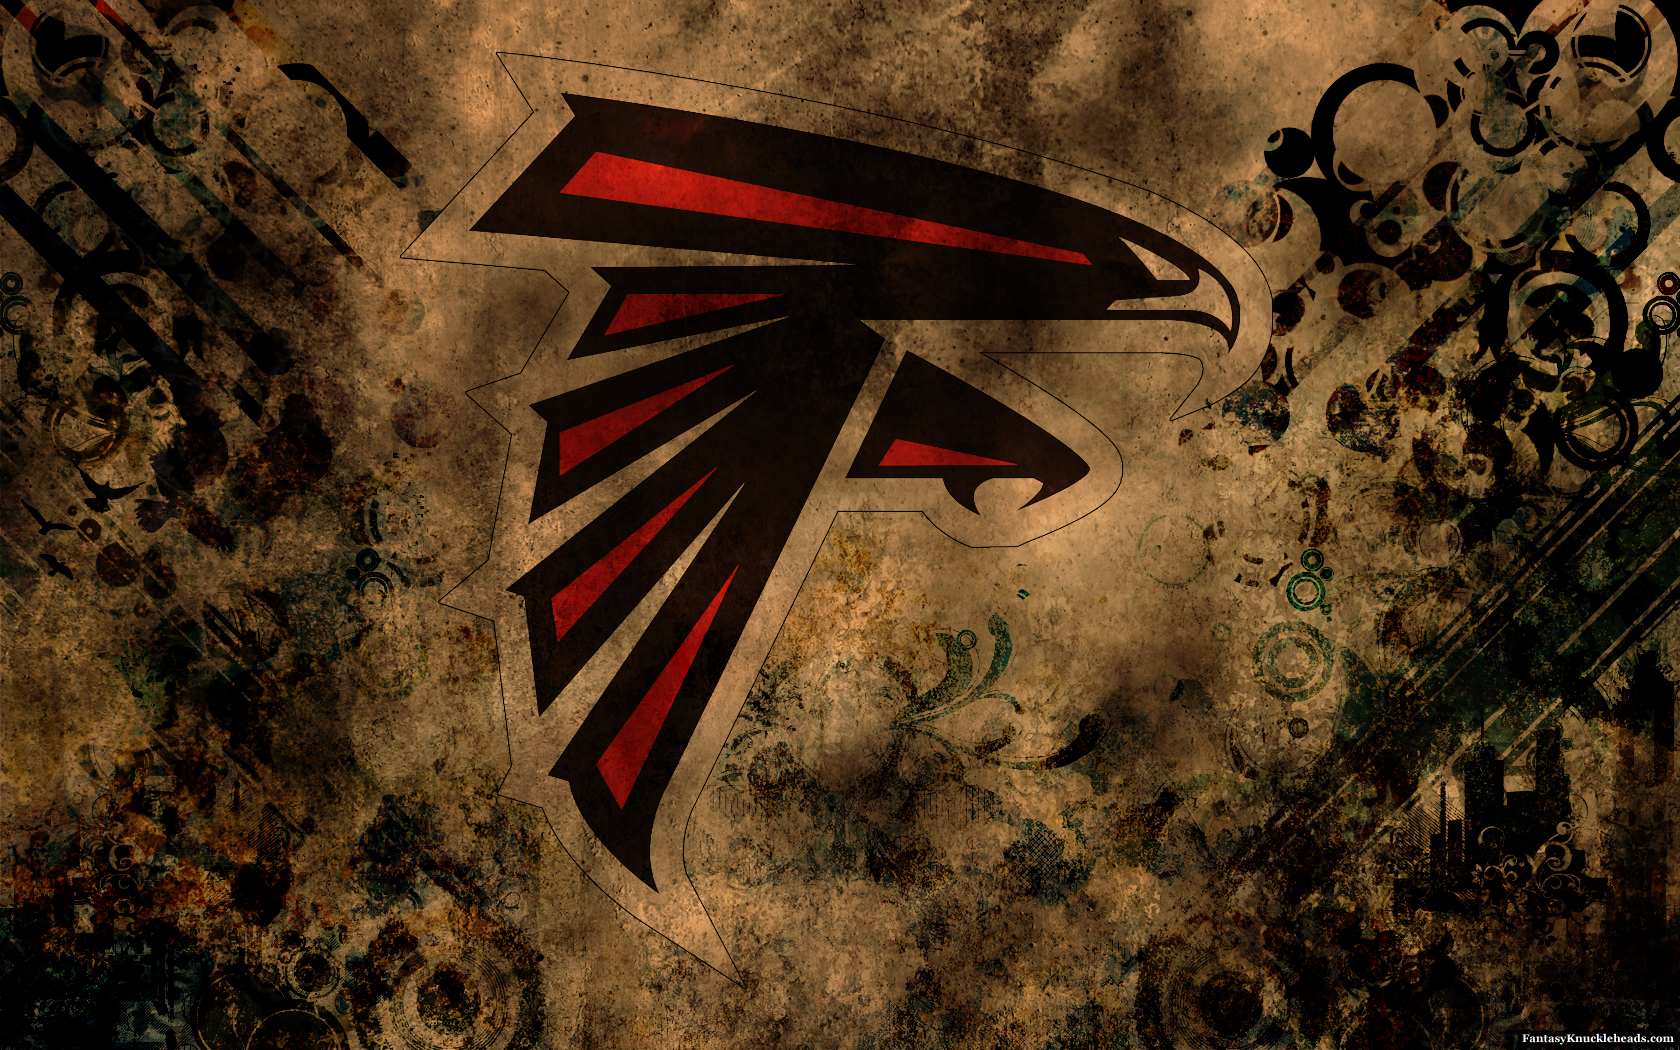 Nfl Team Wallpaper For Desktop iPad And Mac Other Work Included